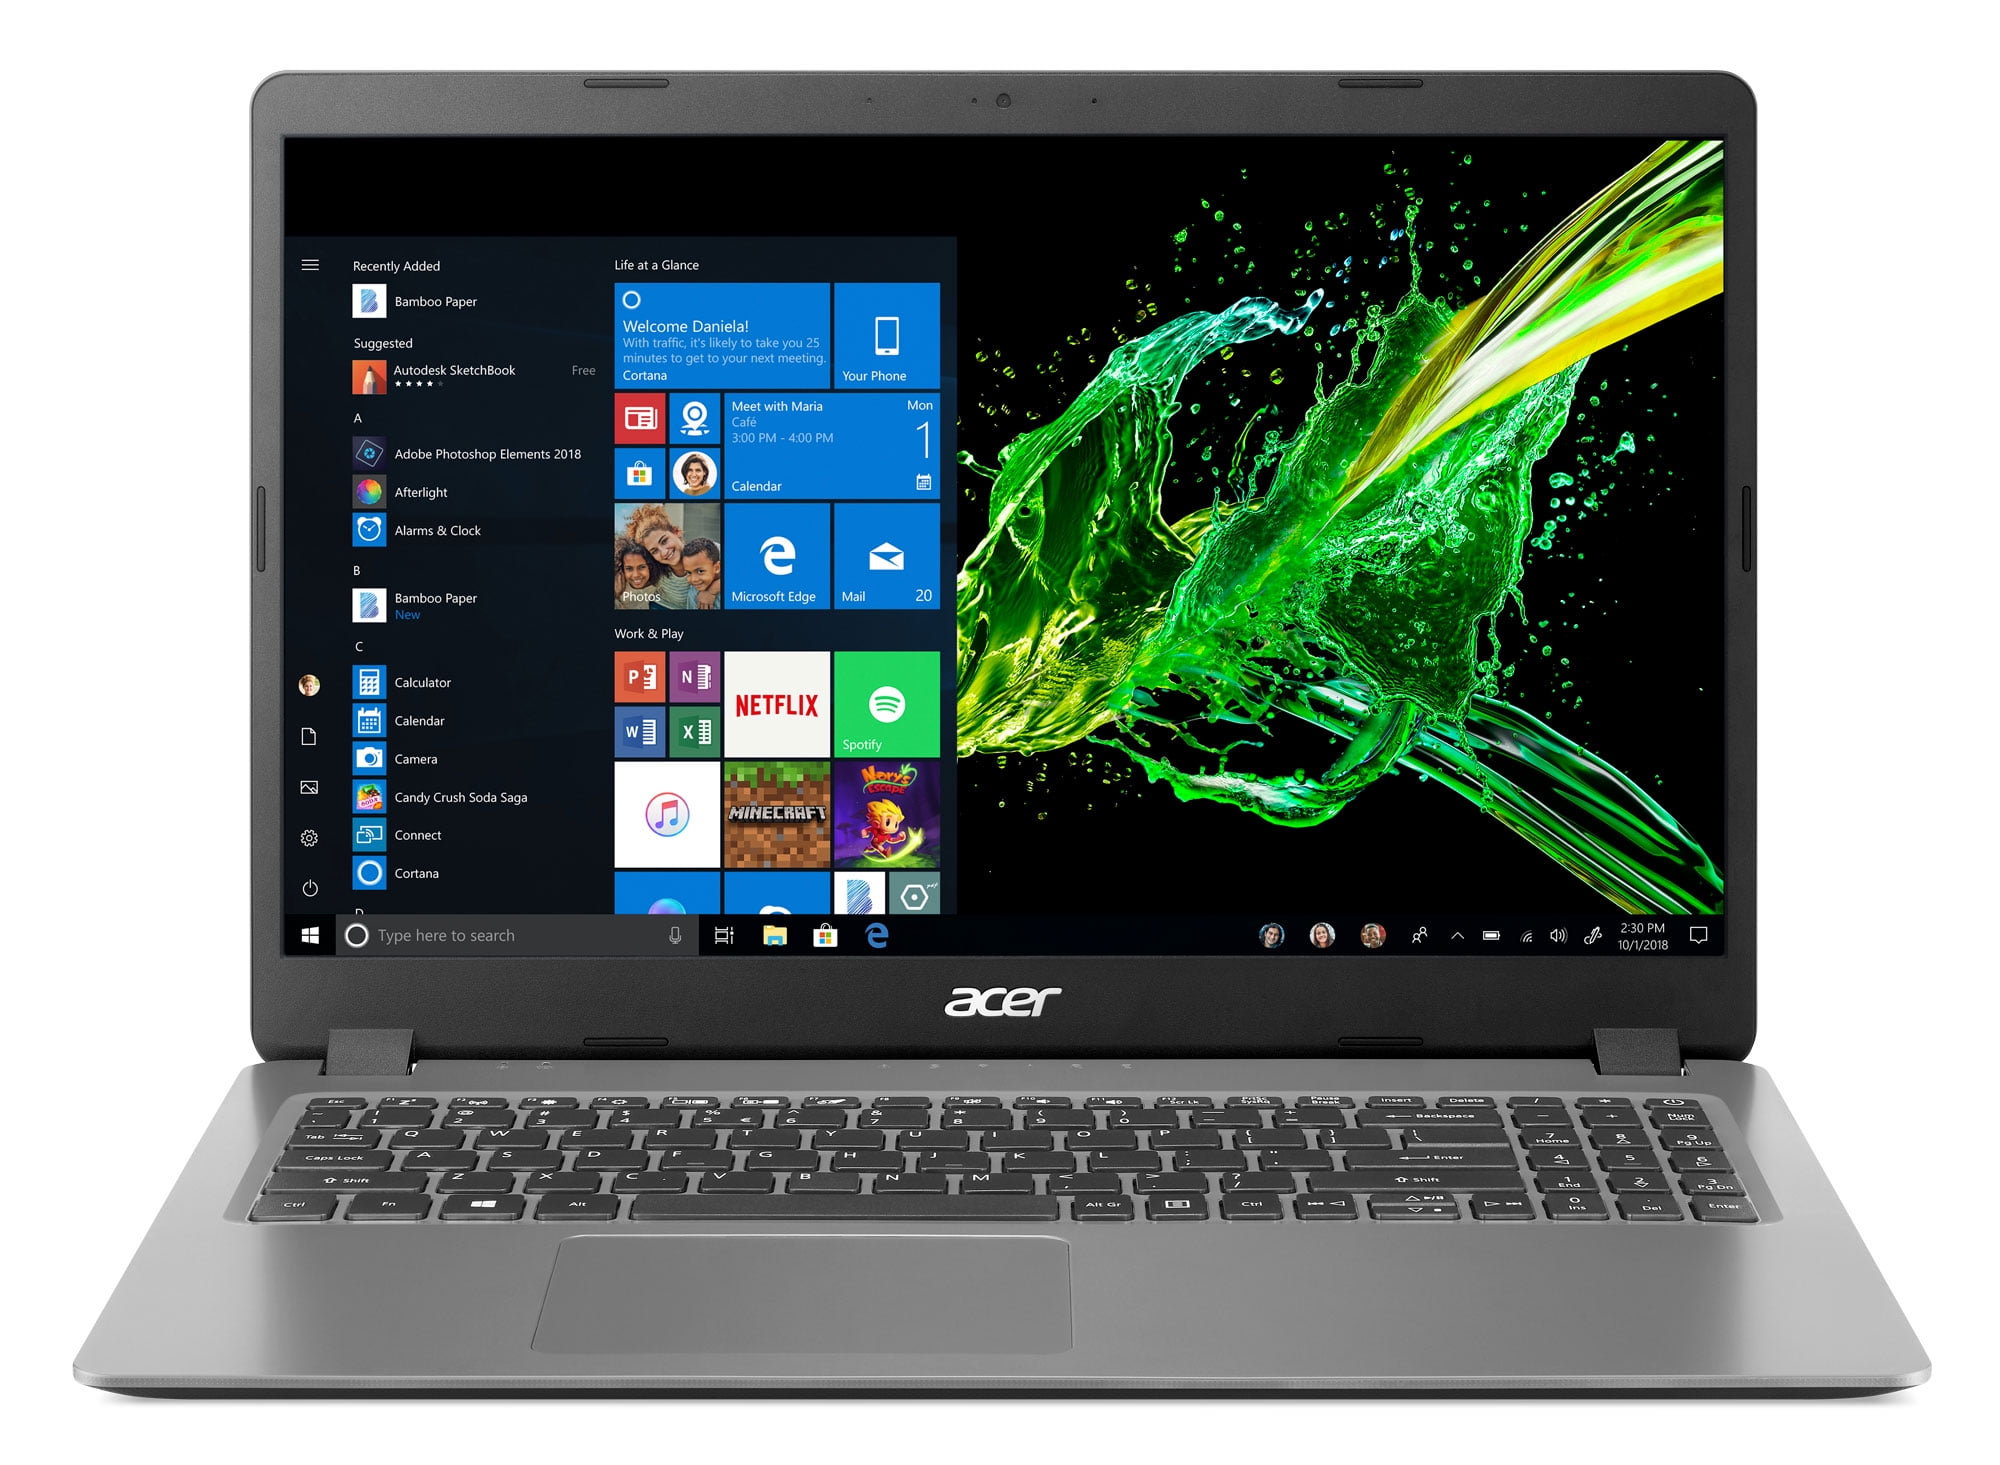 Acer Aspire 5 A515 43 R19l Ryzen 3 3200u 2 6 Ghz Windows 10 Home 64 Bit In S Mode 4 Gb Ram 128 Gb Ssd 15 6 Ips 1920 X - how to download roblox on a acer computer